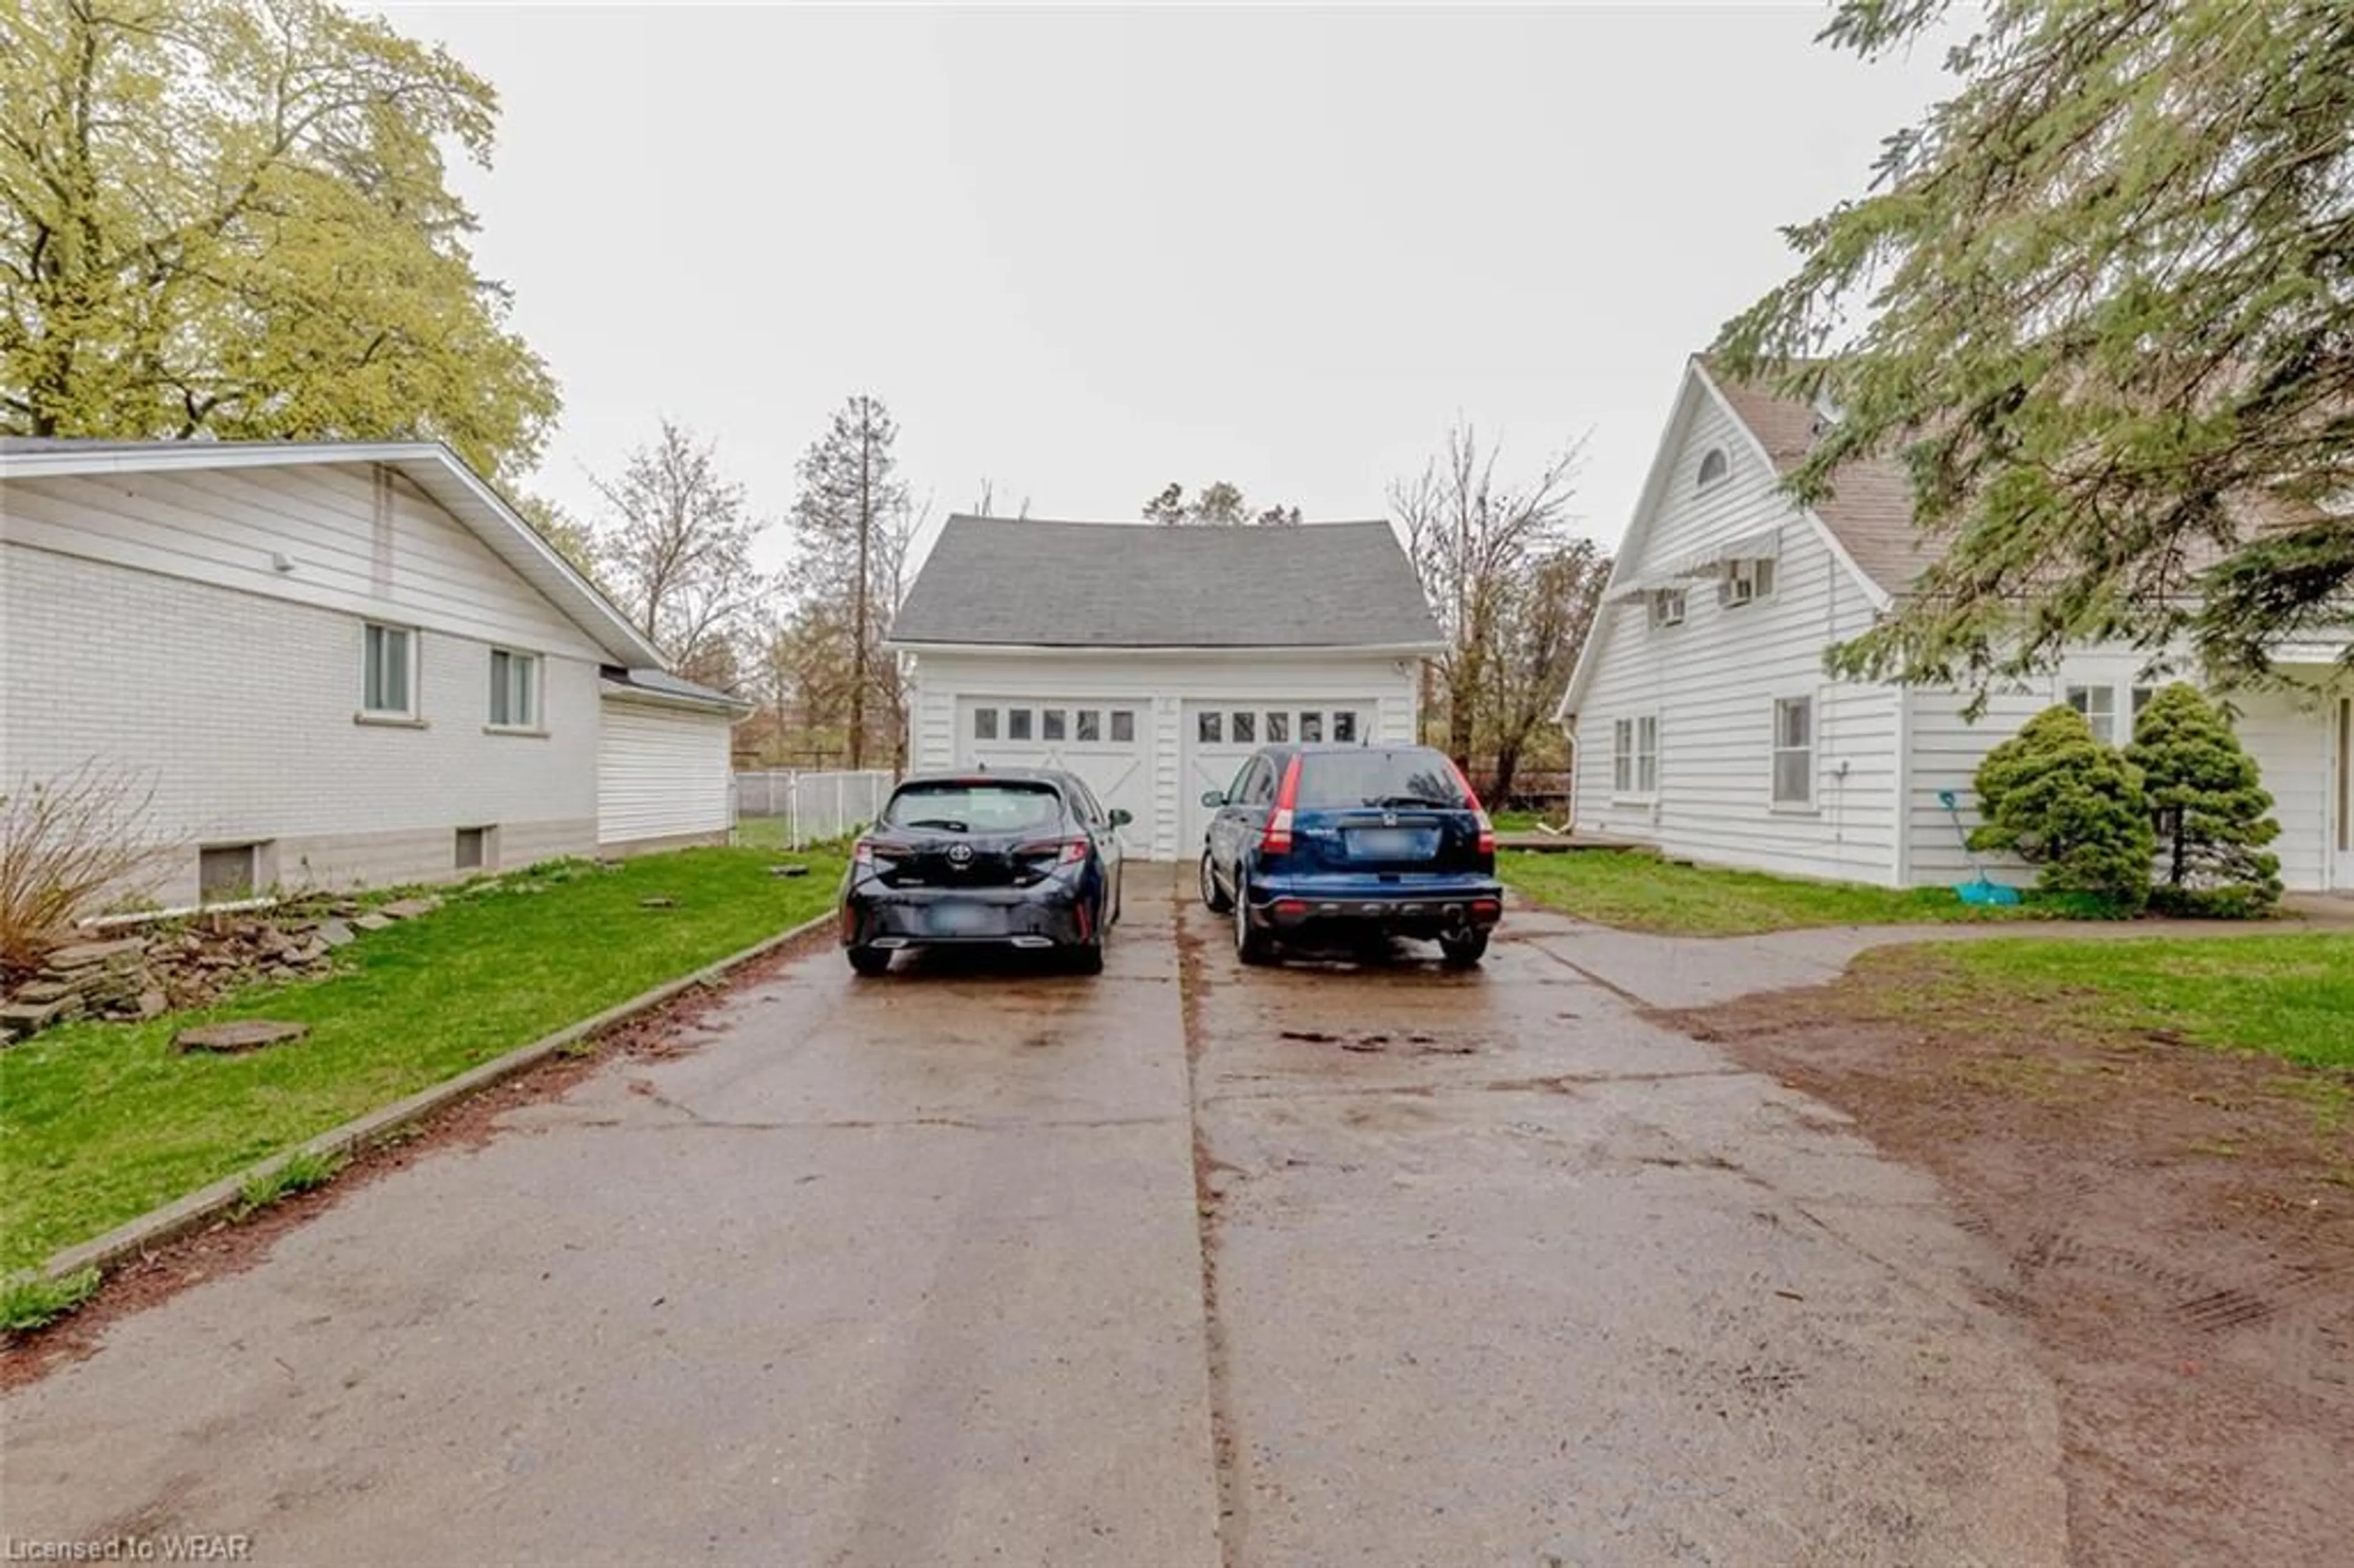 Street view for 1701 King St, Cambridge Ontario N3H 3R6